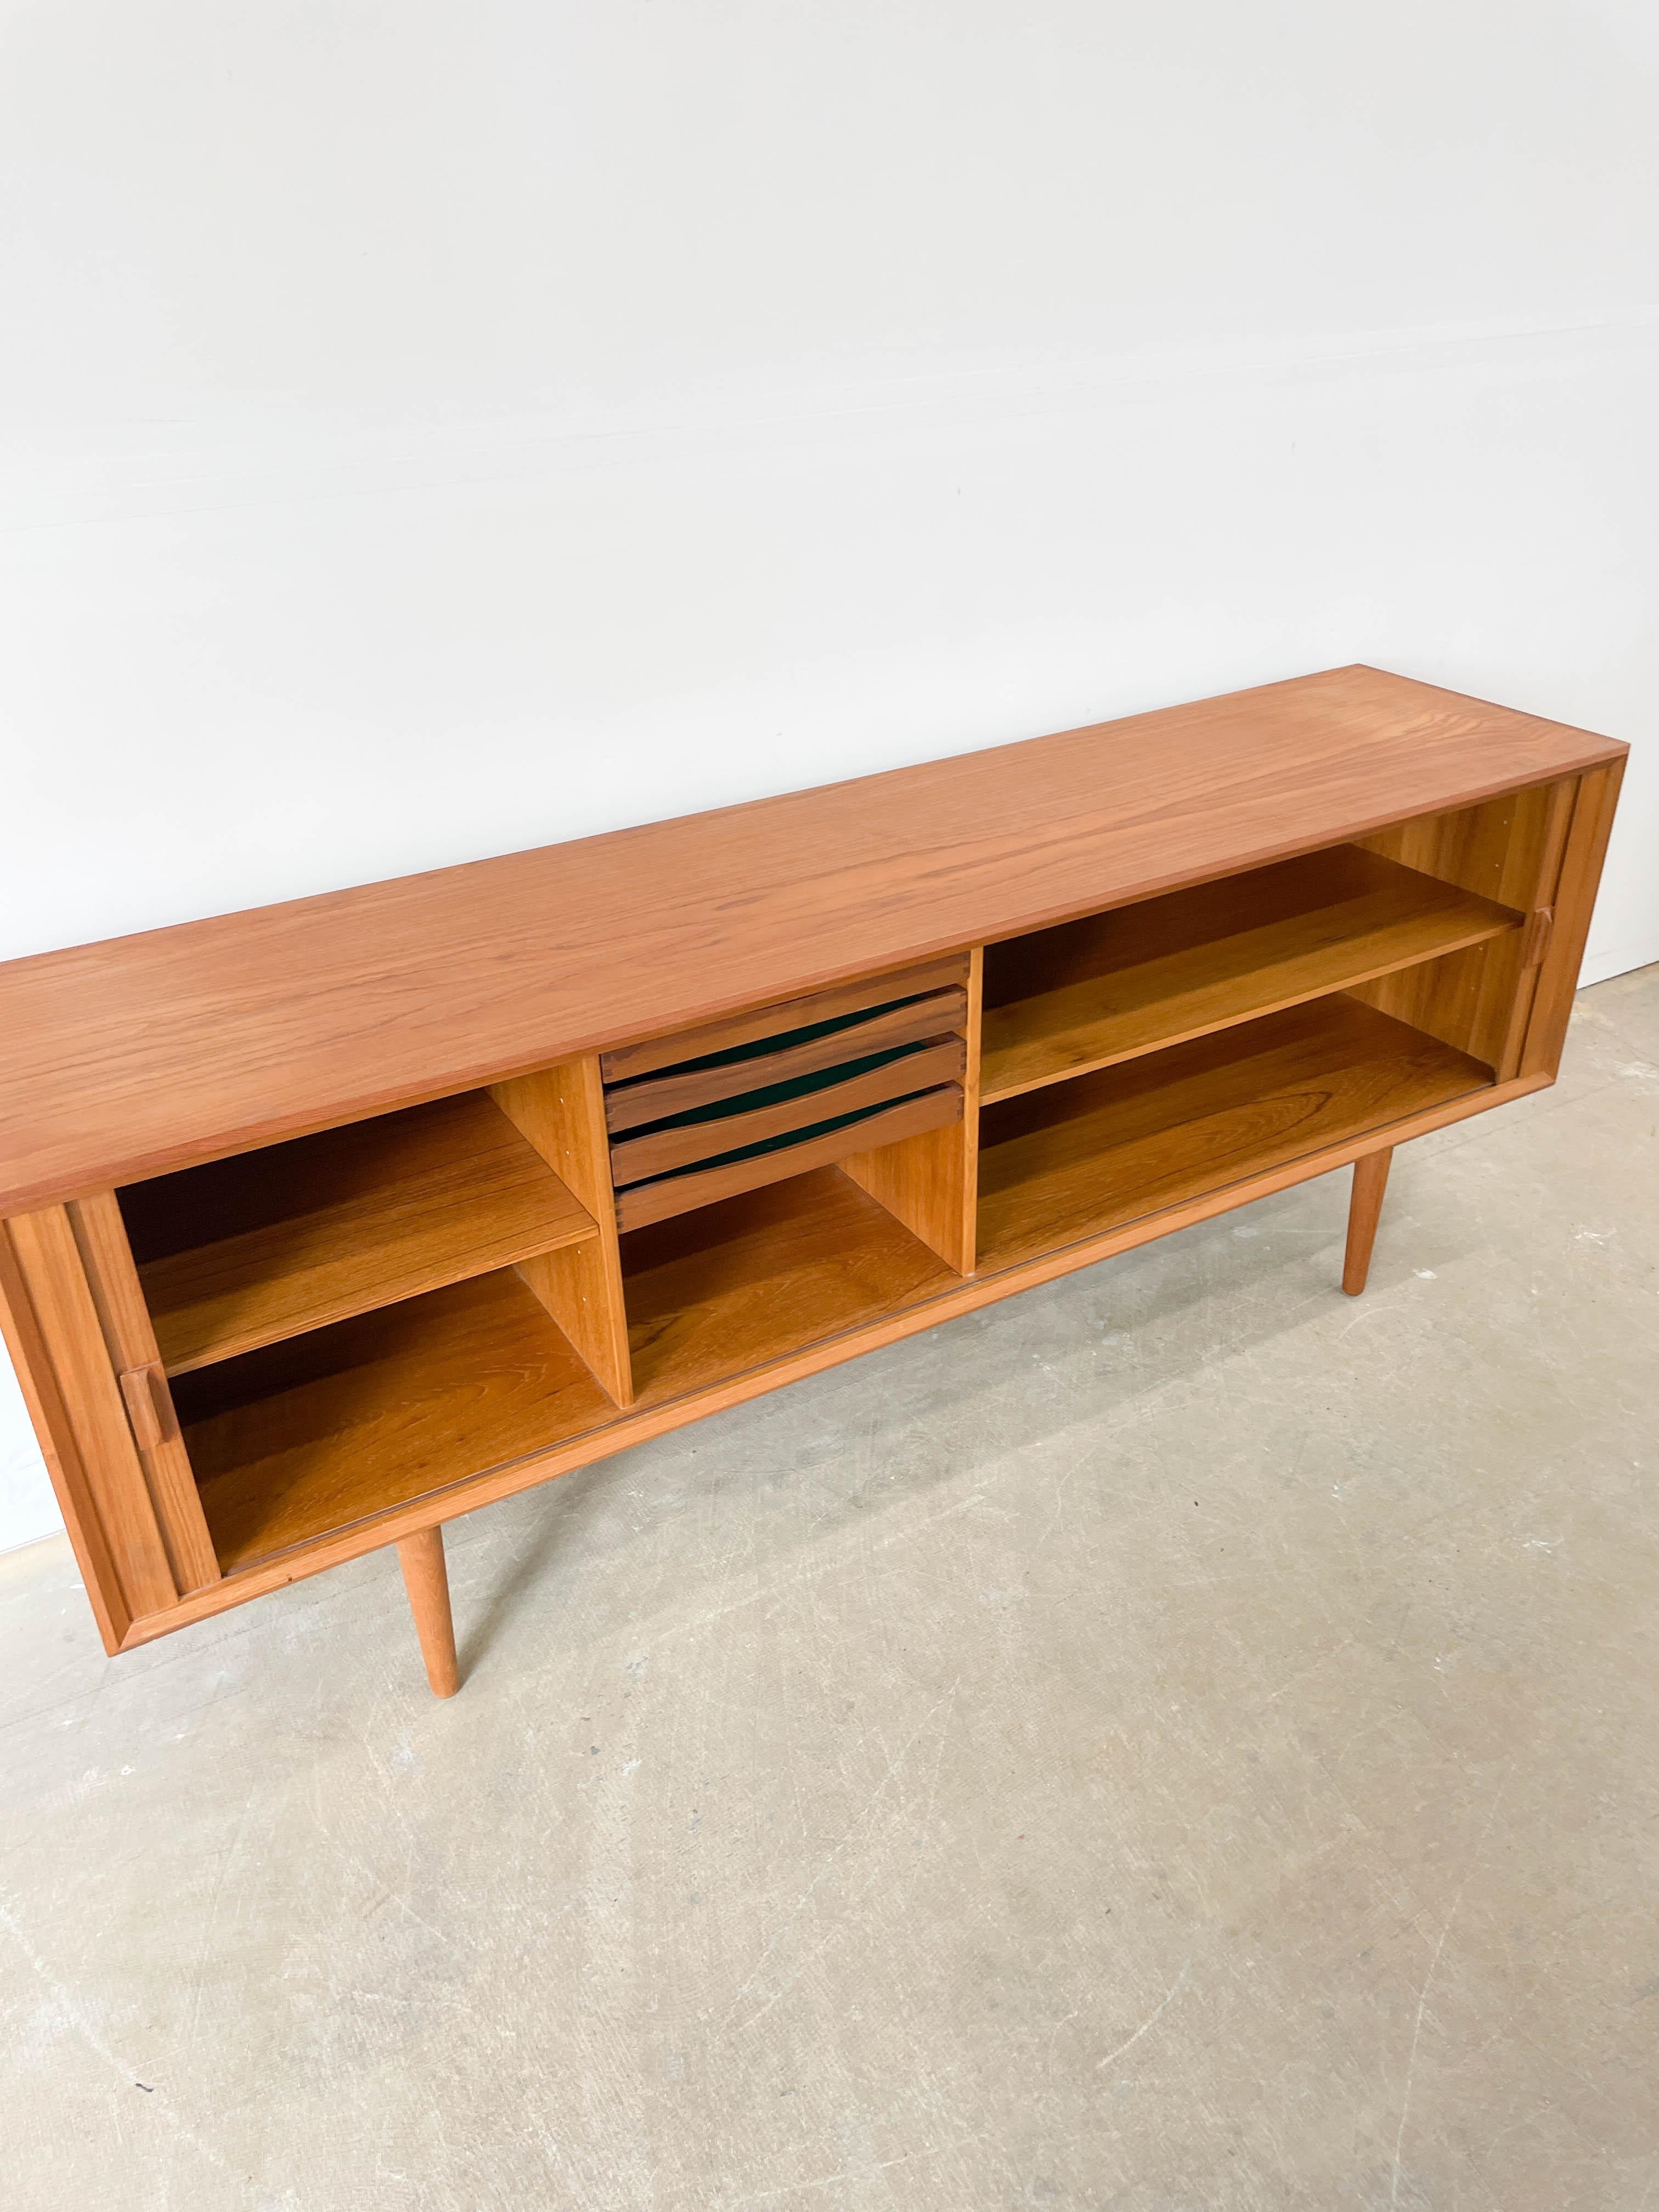 20th Century Teak Credenza by Svend Larsen for Faarup